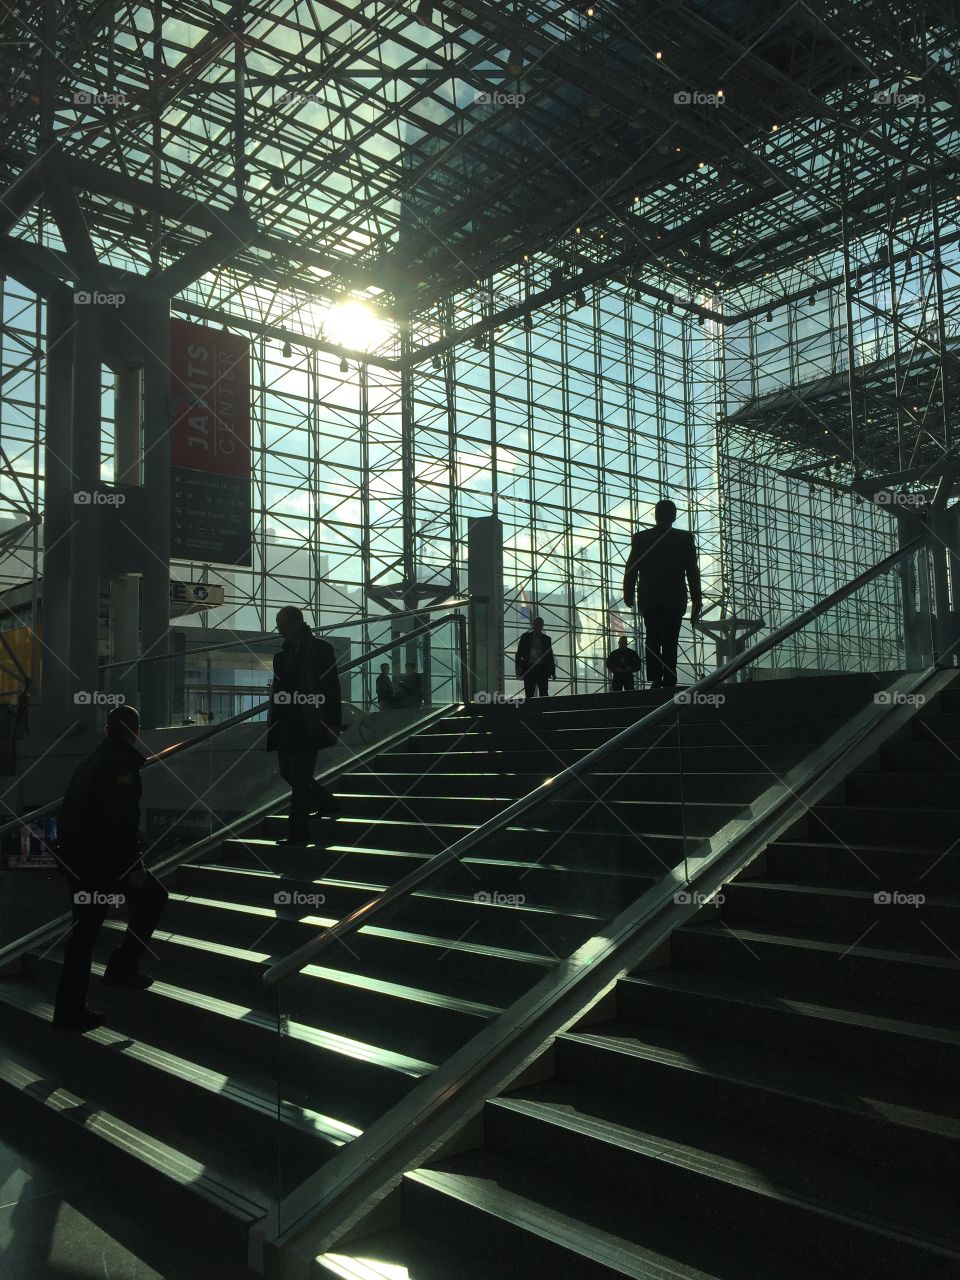 Jacob Javits Center staircase early morning